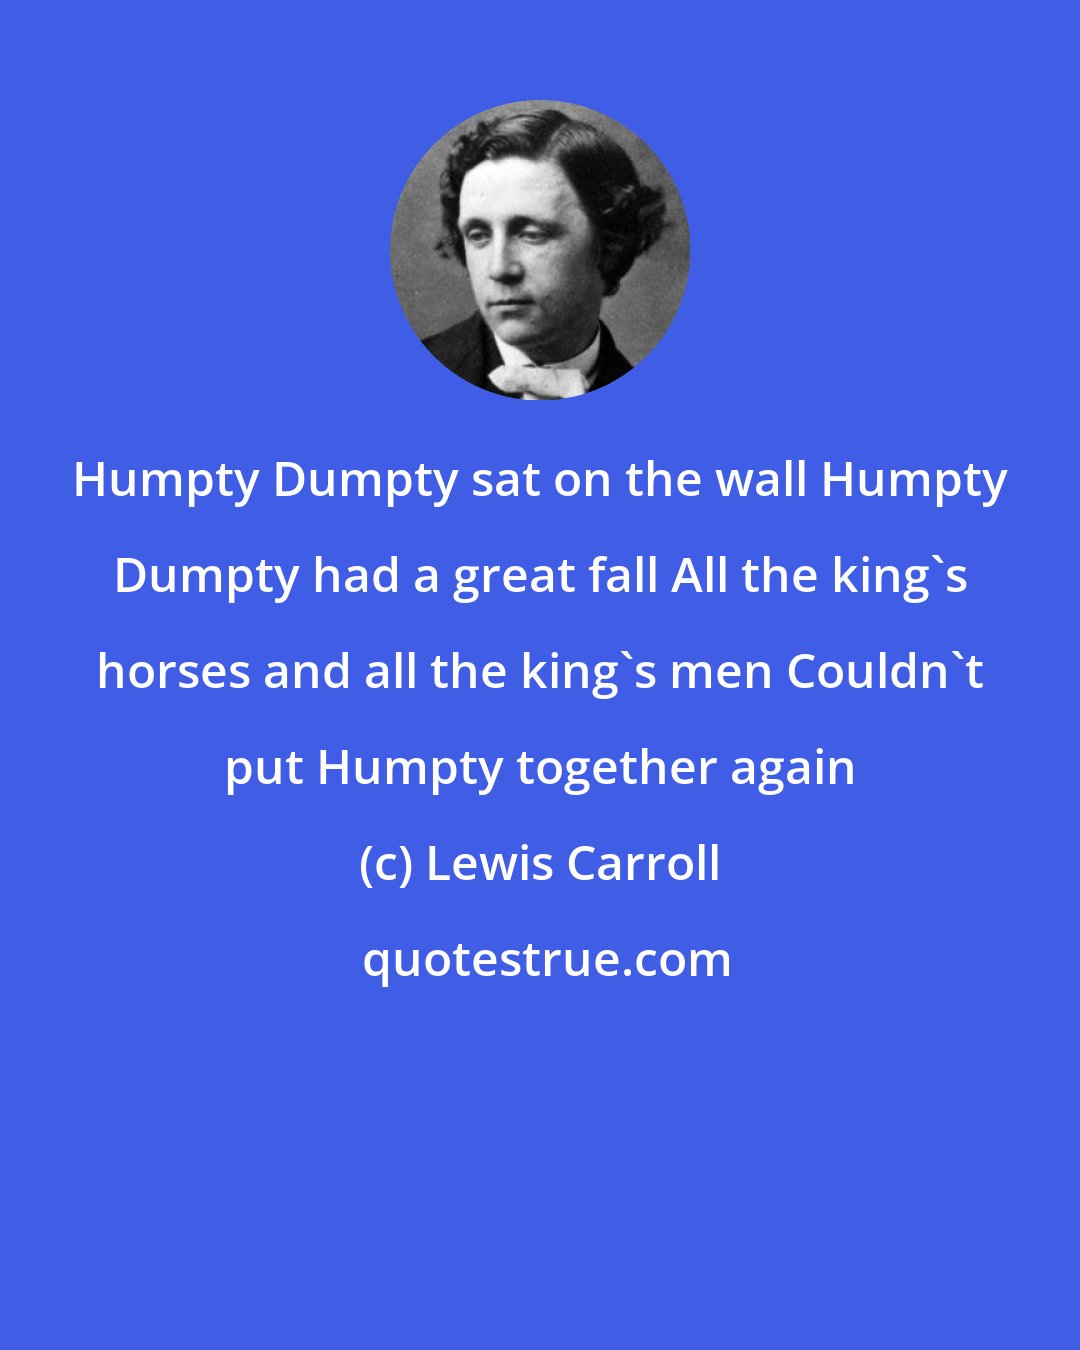 Lewis Carroll: Humpty Dumpty sat on the wall Humpty Dumpty had a great fall All the king's horses and all the king's men Couldn't put Humpty together again